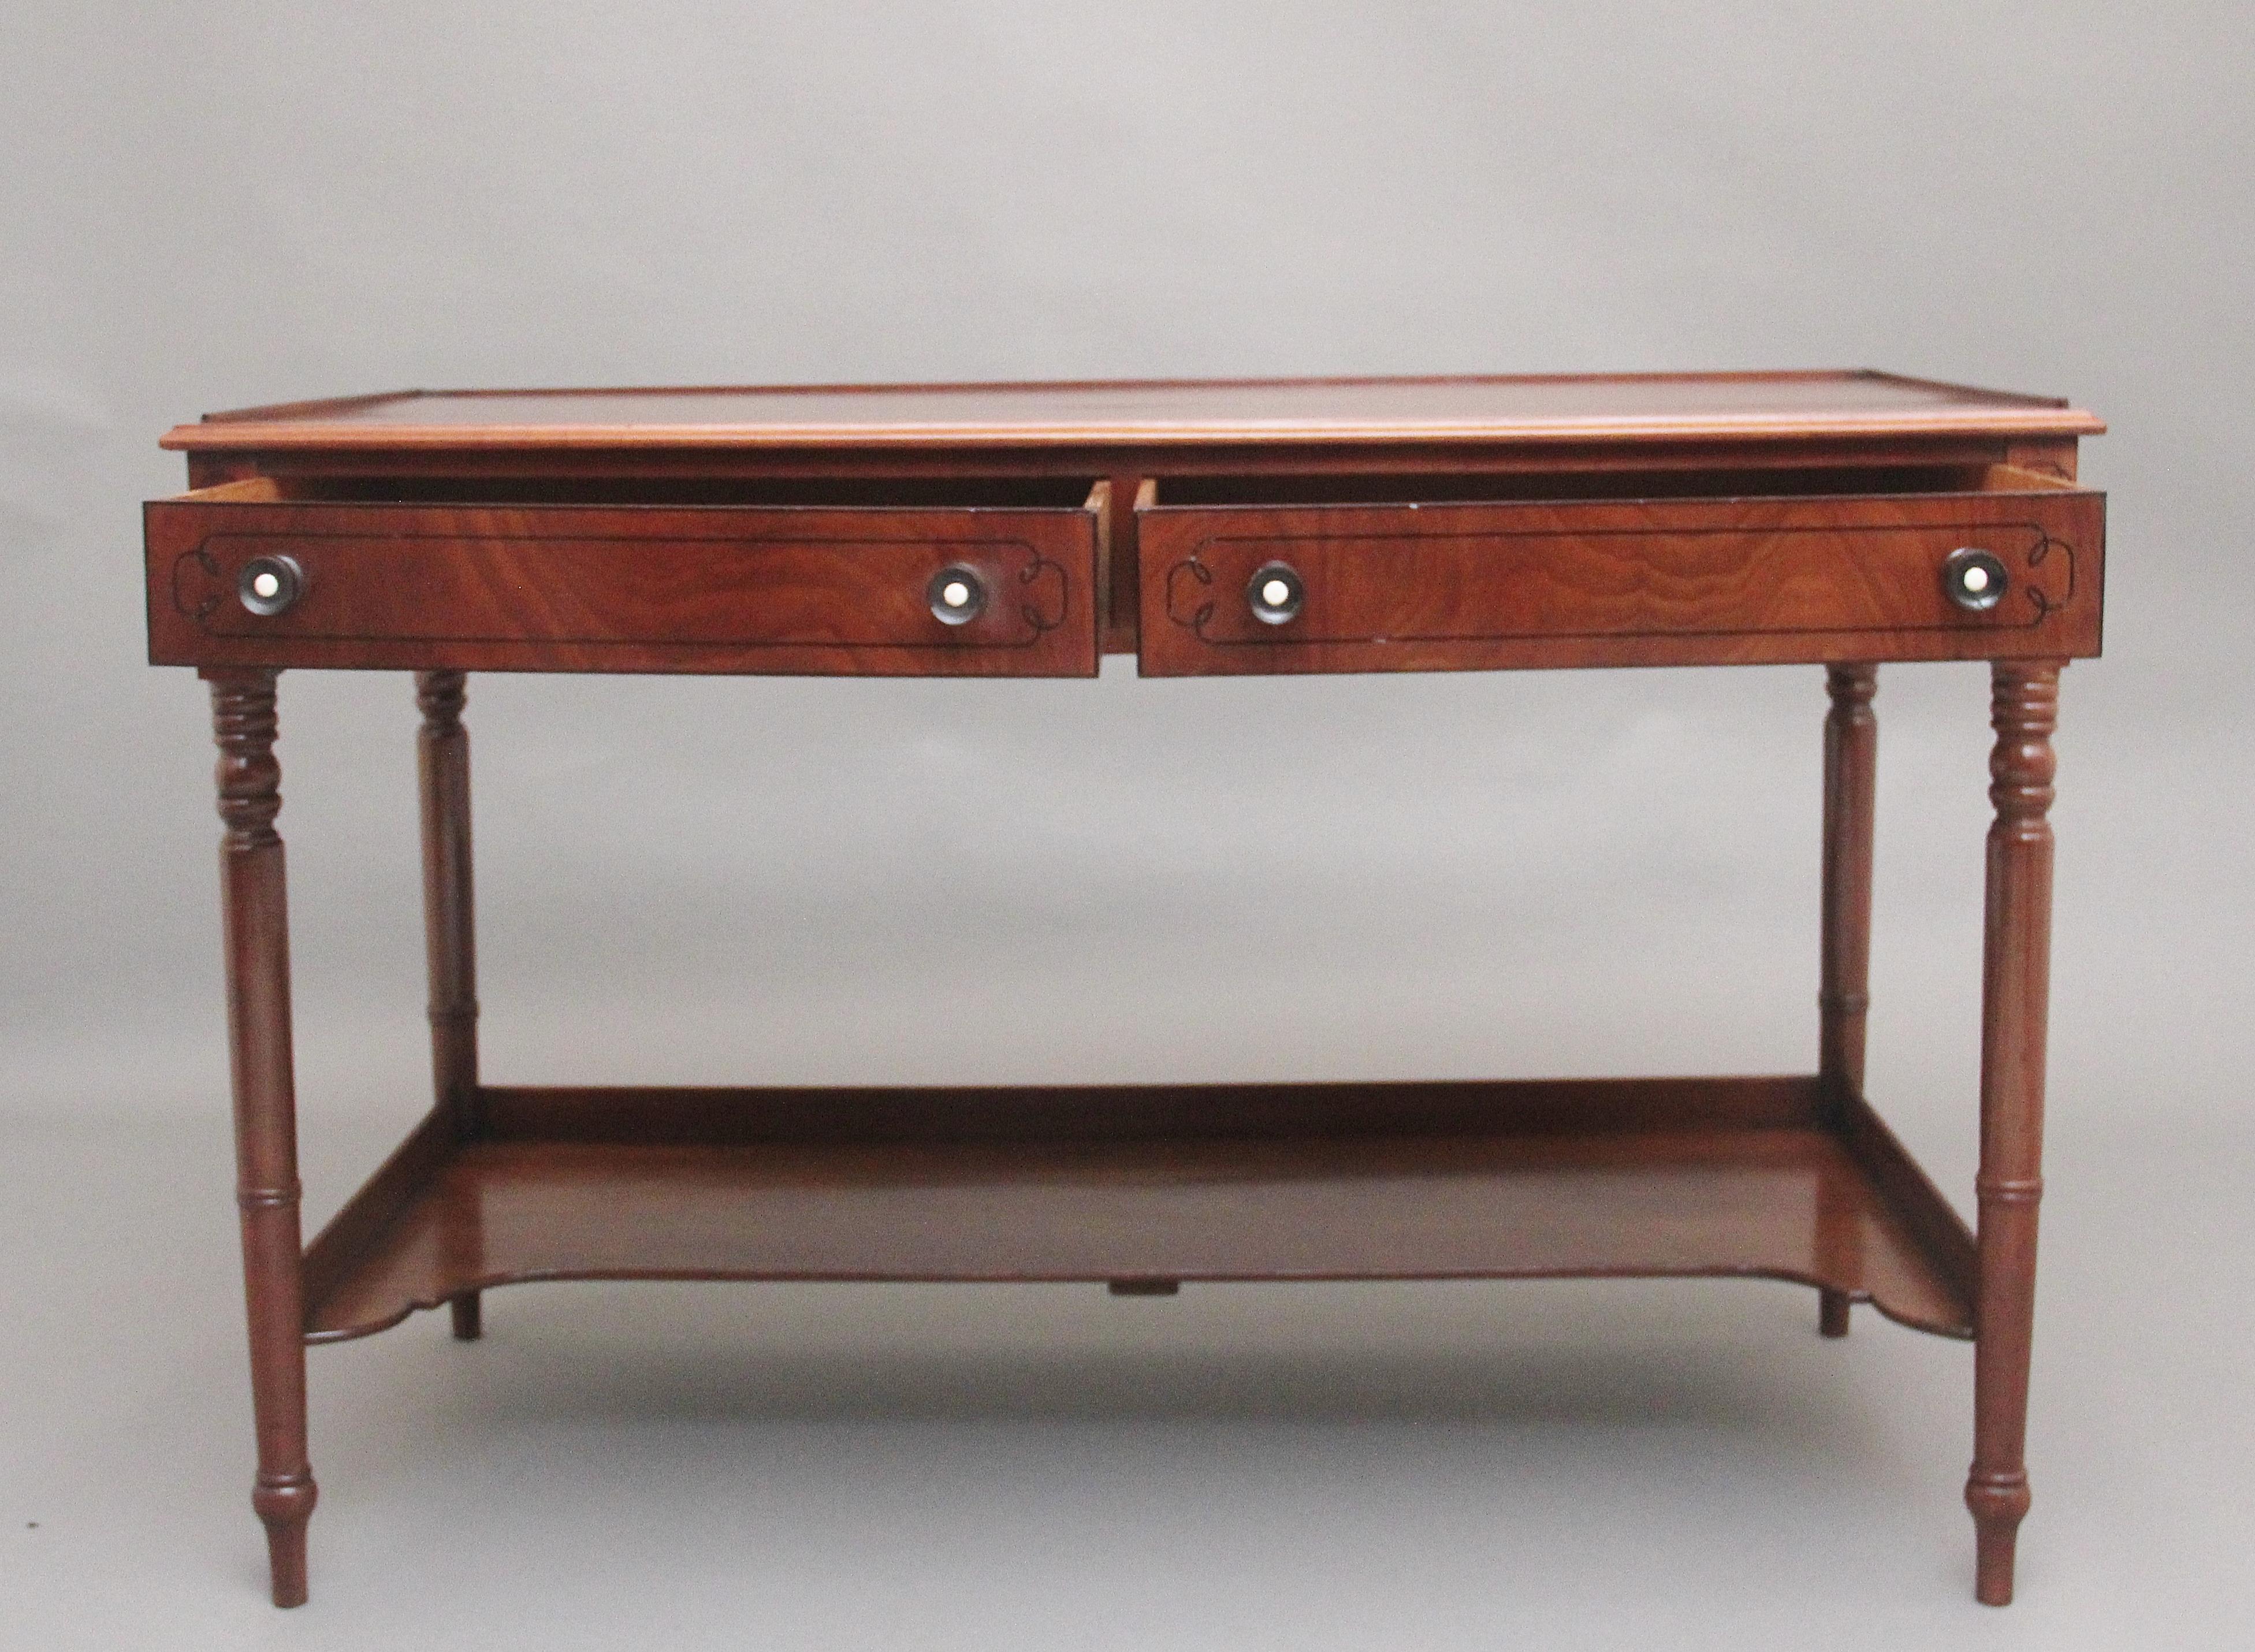 Early 19th Century Regency mahogany serving / side table, having a nice figured moulded edge top above two oak lined drawers with the original turned handles, decorative black line inlay on the drawer fronts and sides of the table, supported on